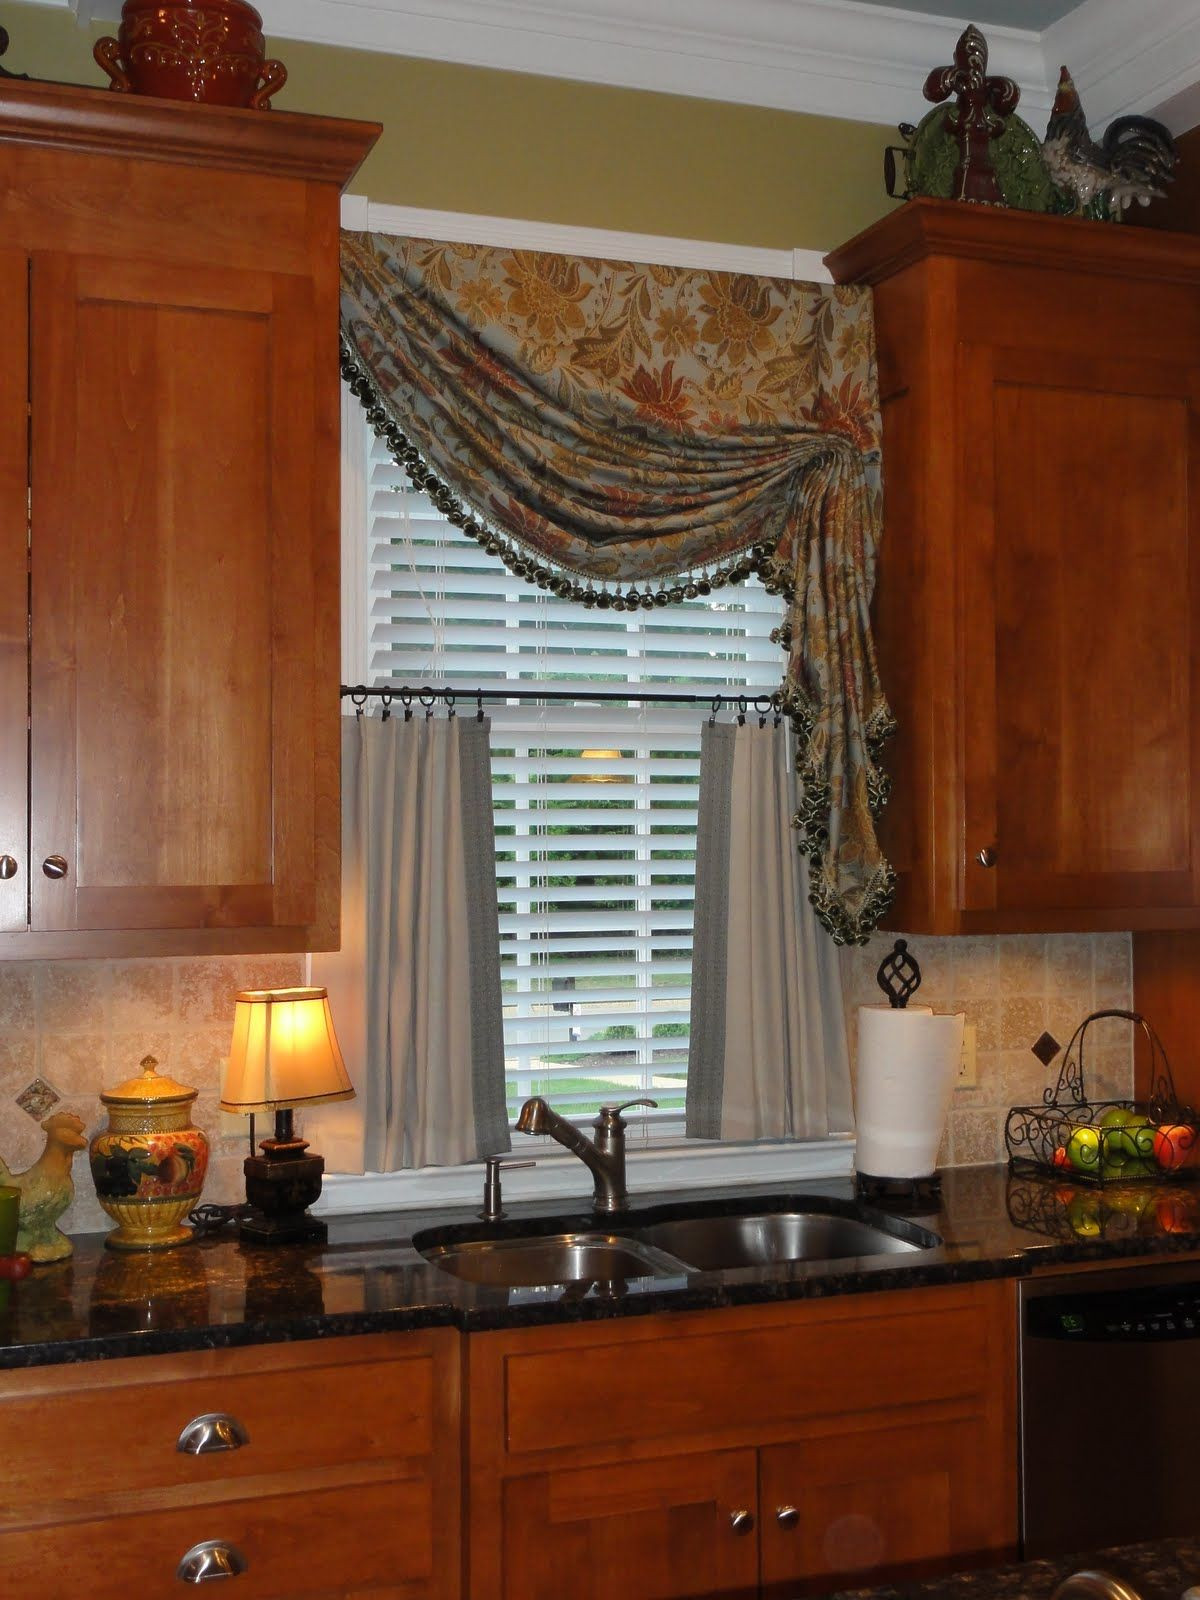 Kitchen Curtains Images
 A Bunch of Inspiring Kitchen Curtains Ideas for Getting